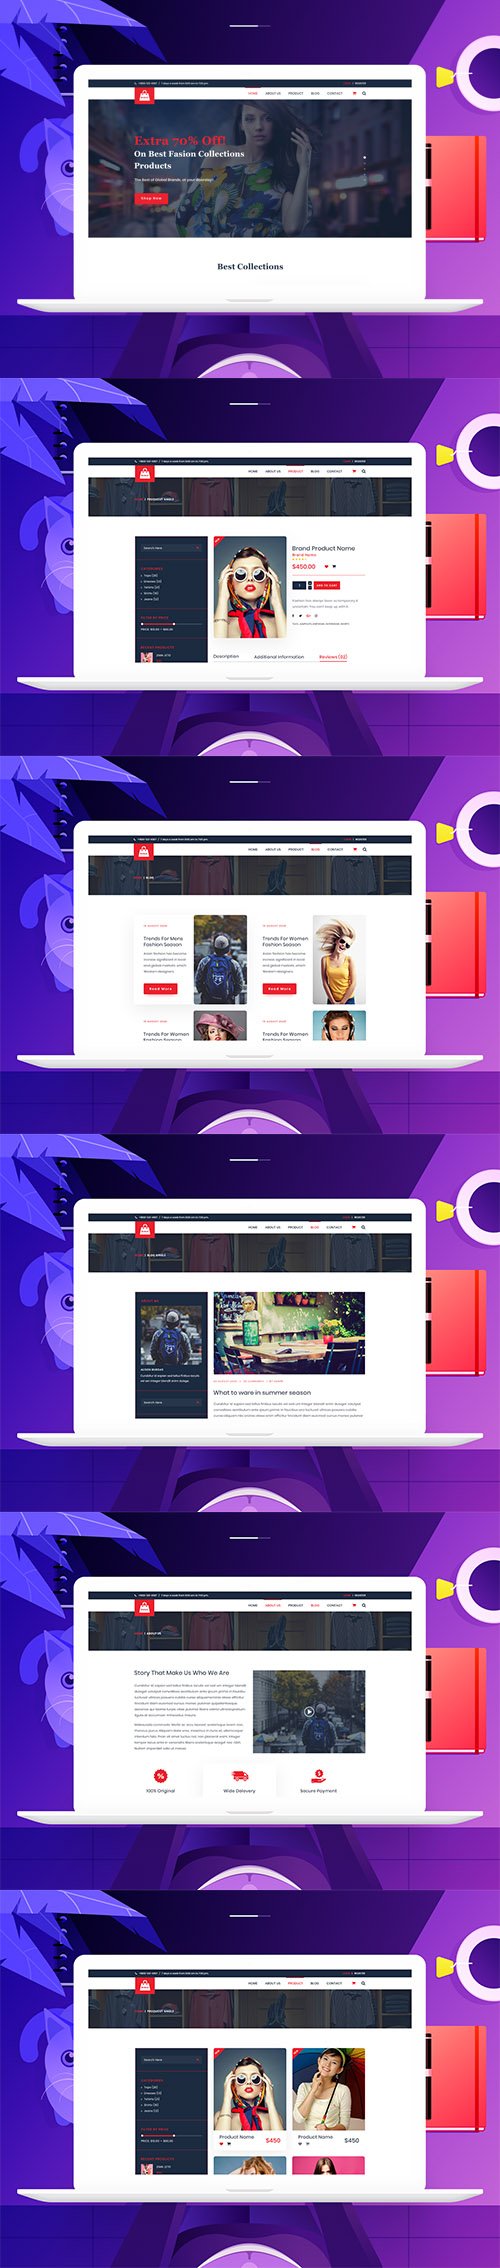 Trendy E-commerce Website Template made for Photoshop and XD